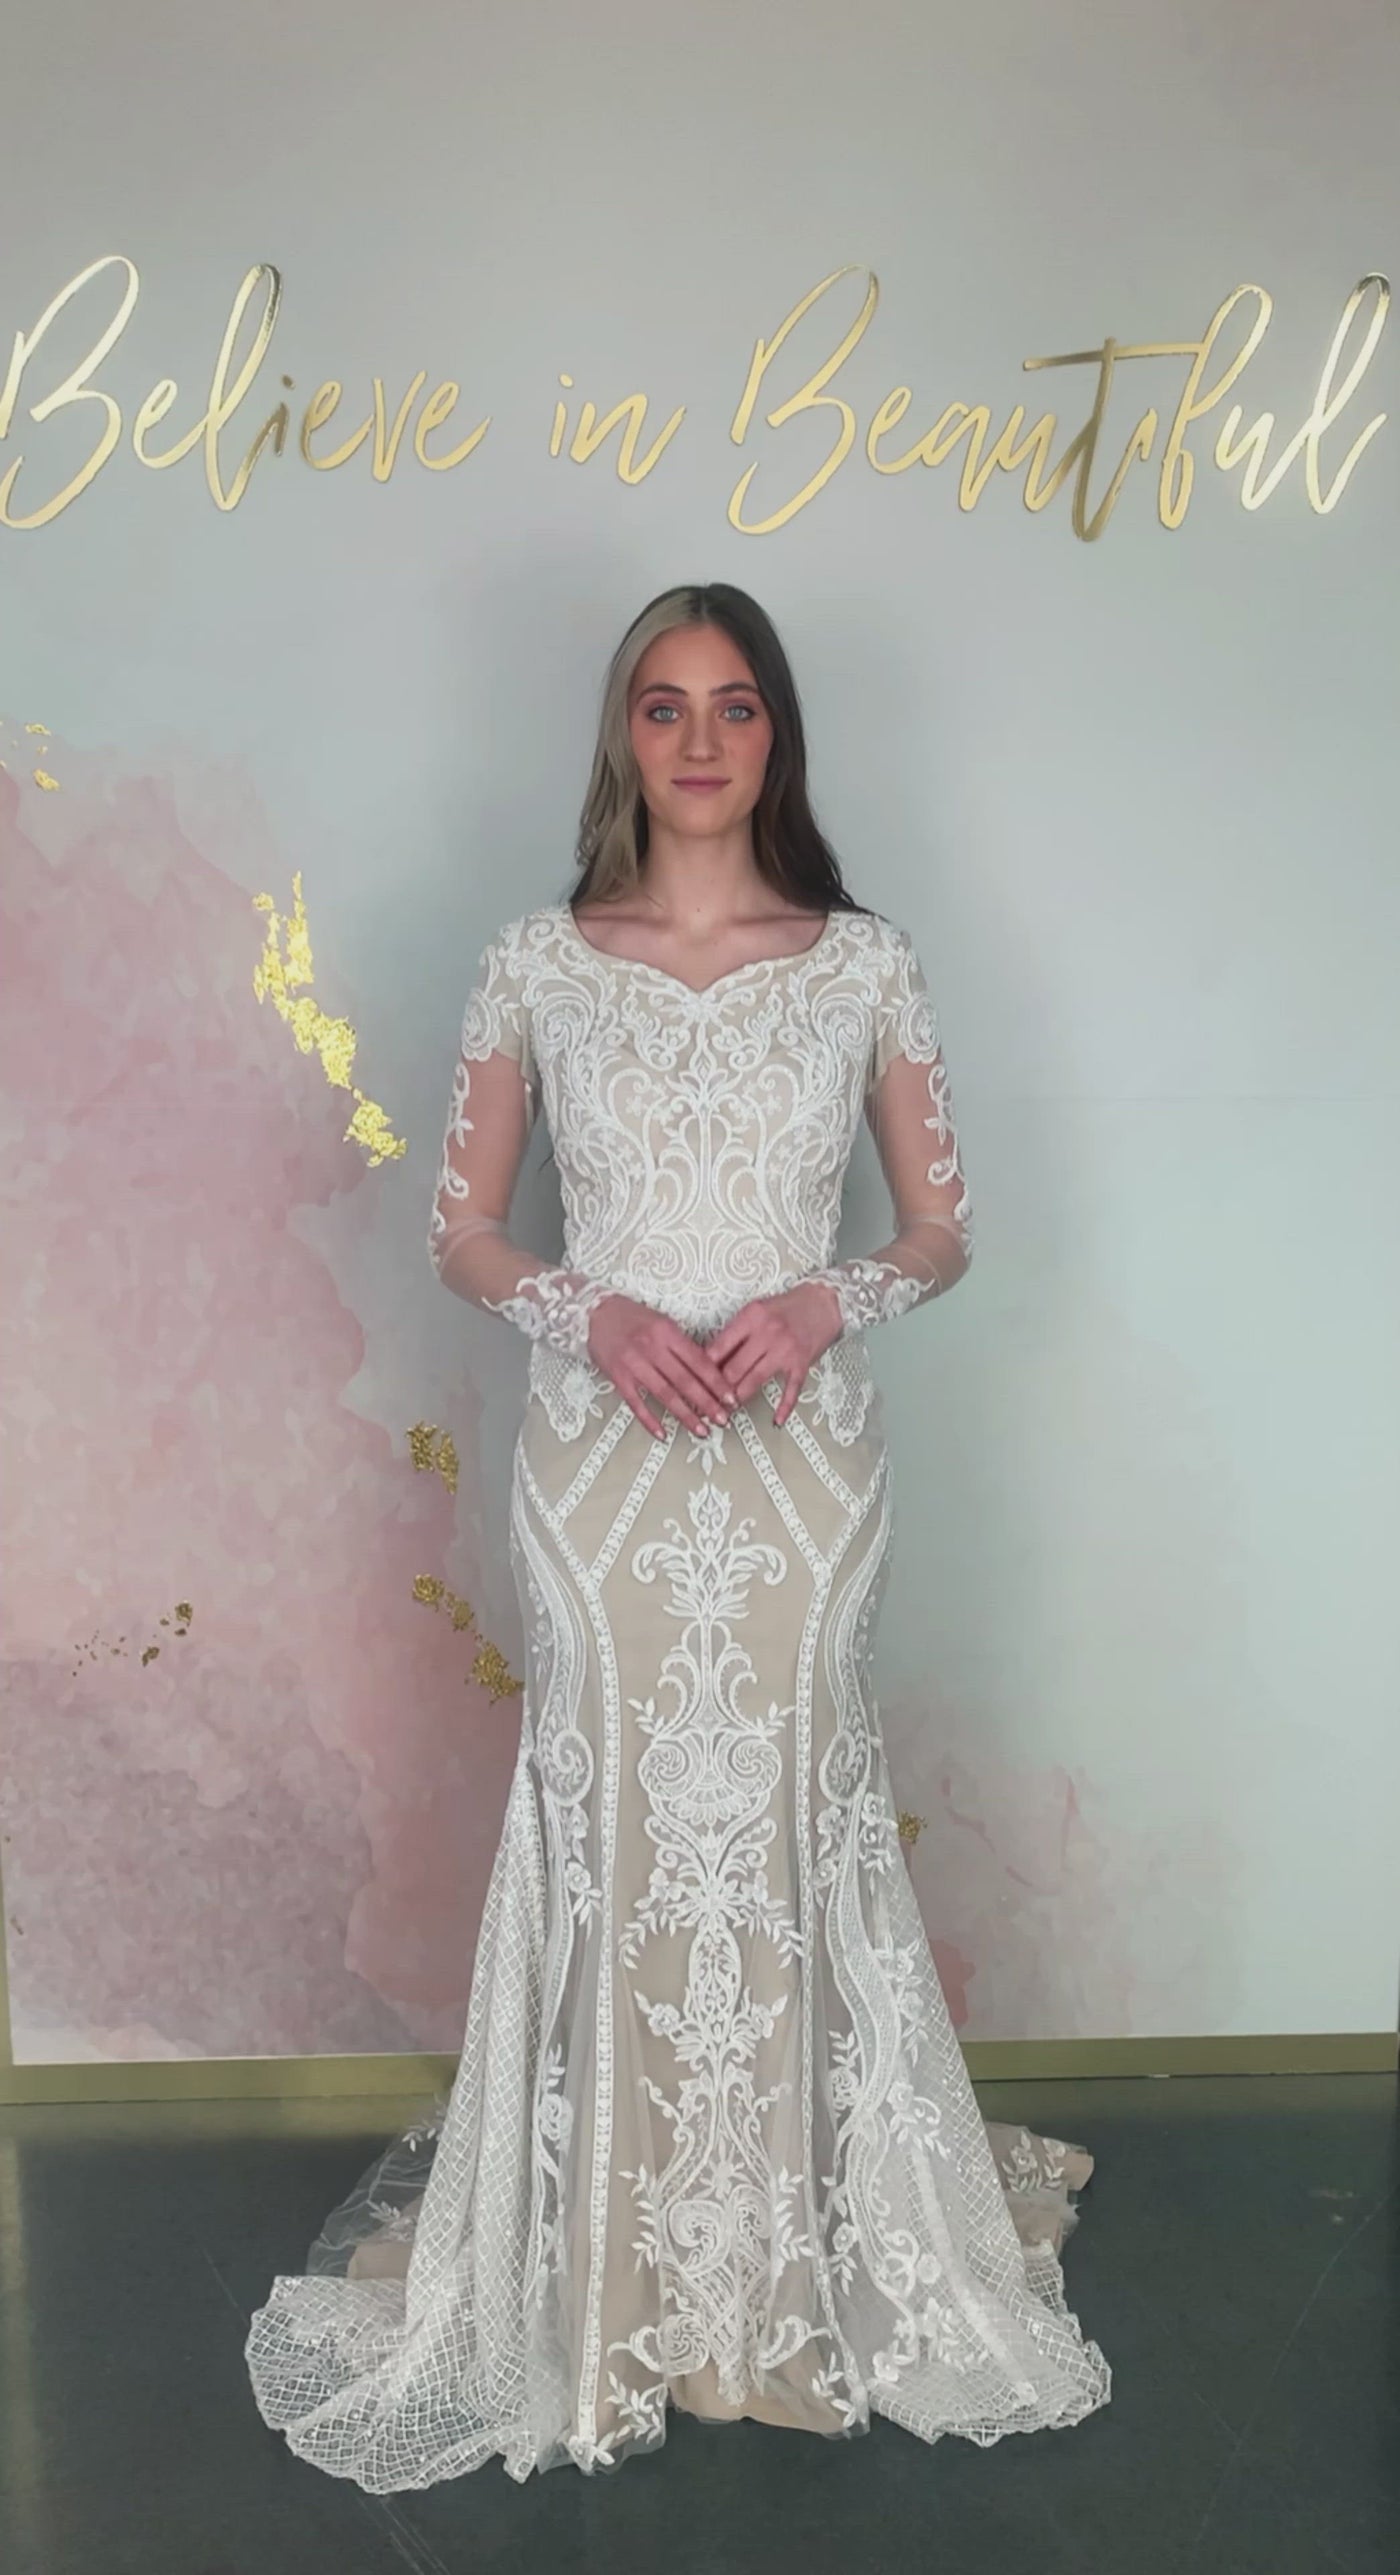 Video of modest wedding dress with long sleeves. It has a heart shaped neckline and fitted silhouette. It has lace detailing covering the whole dress. It has buttons on the sleeves.